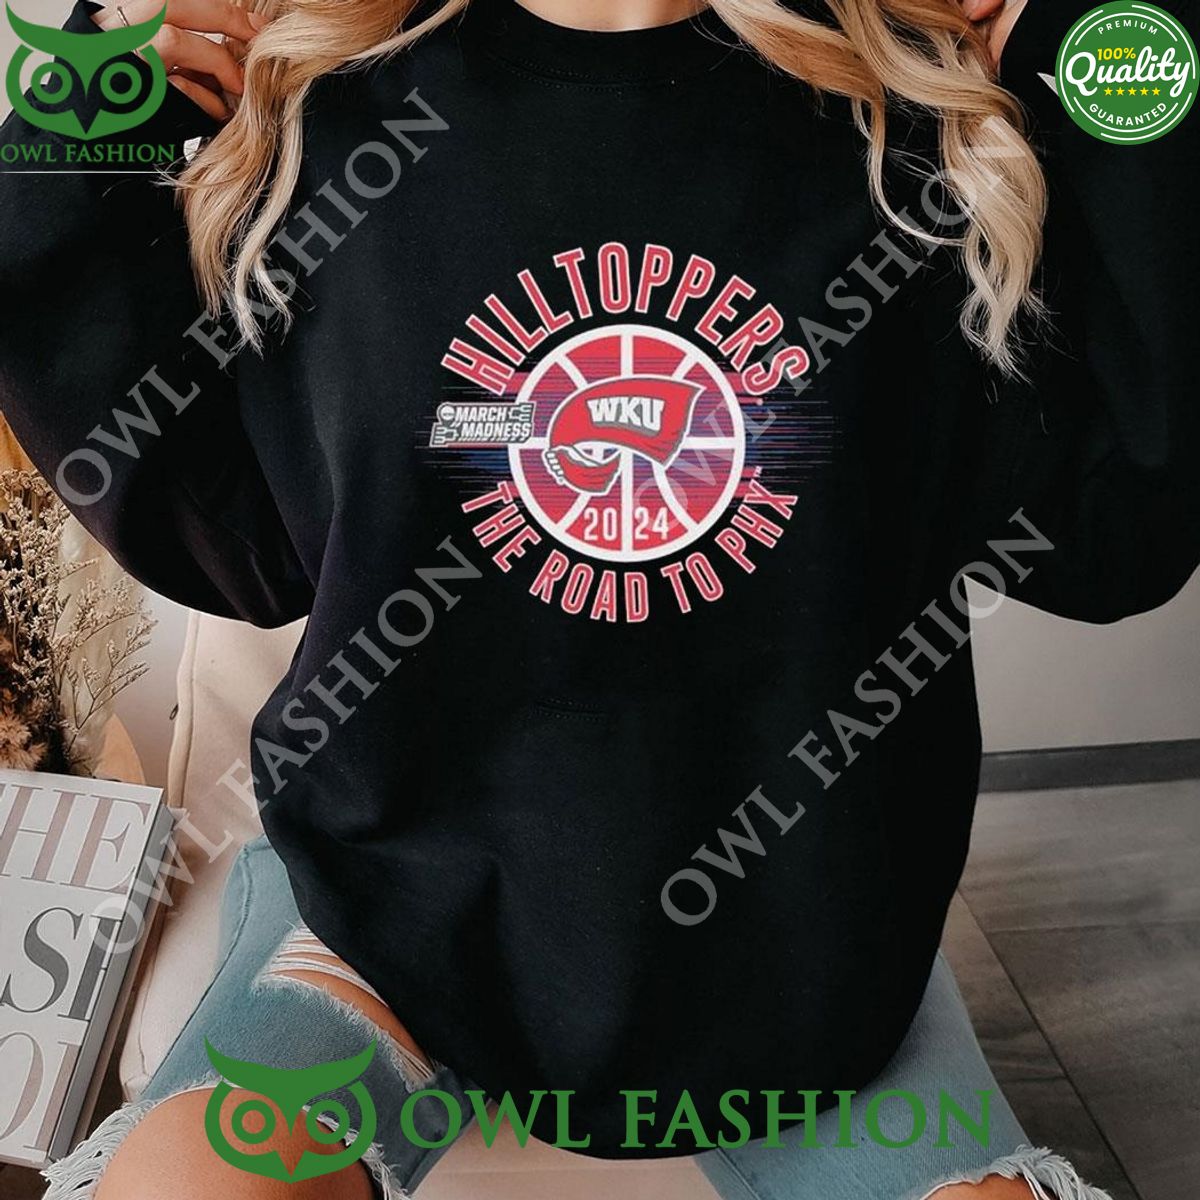 hilltoppers ncaa 2024 the road to phx march madness sweatshirt 1 GqotH.jpg